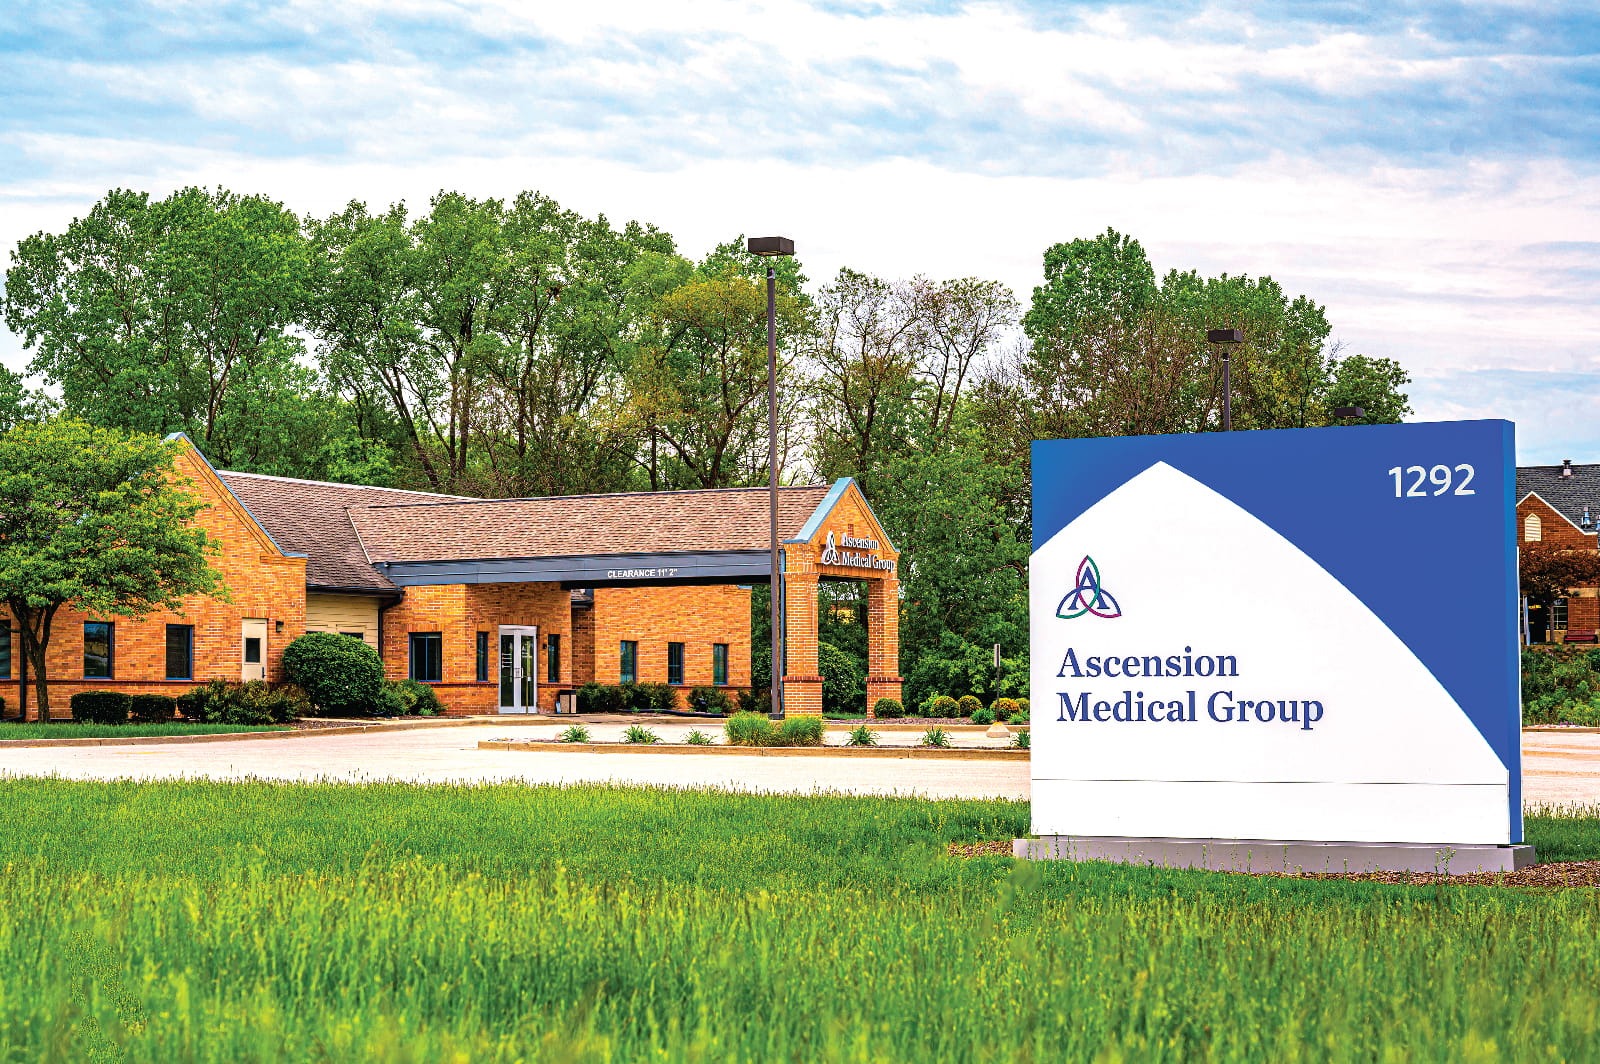 Ascension Medical Group Wisconsin - Pewaukee